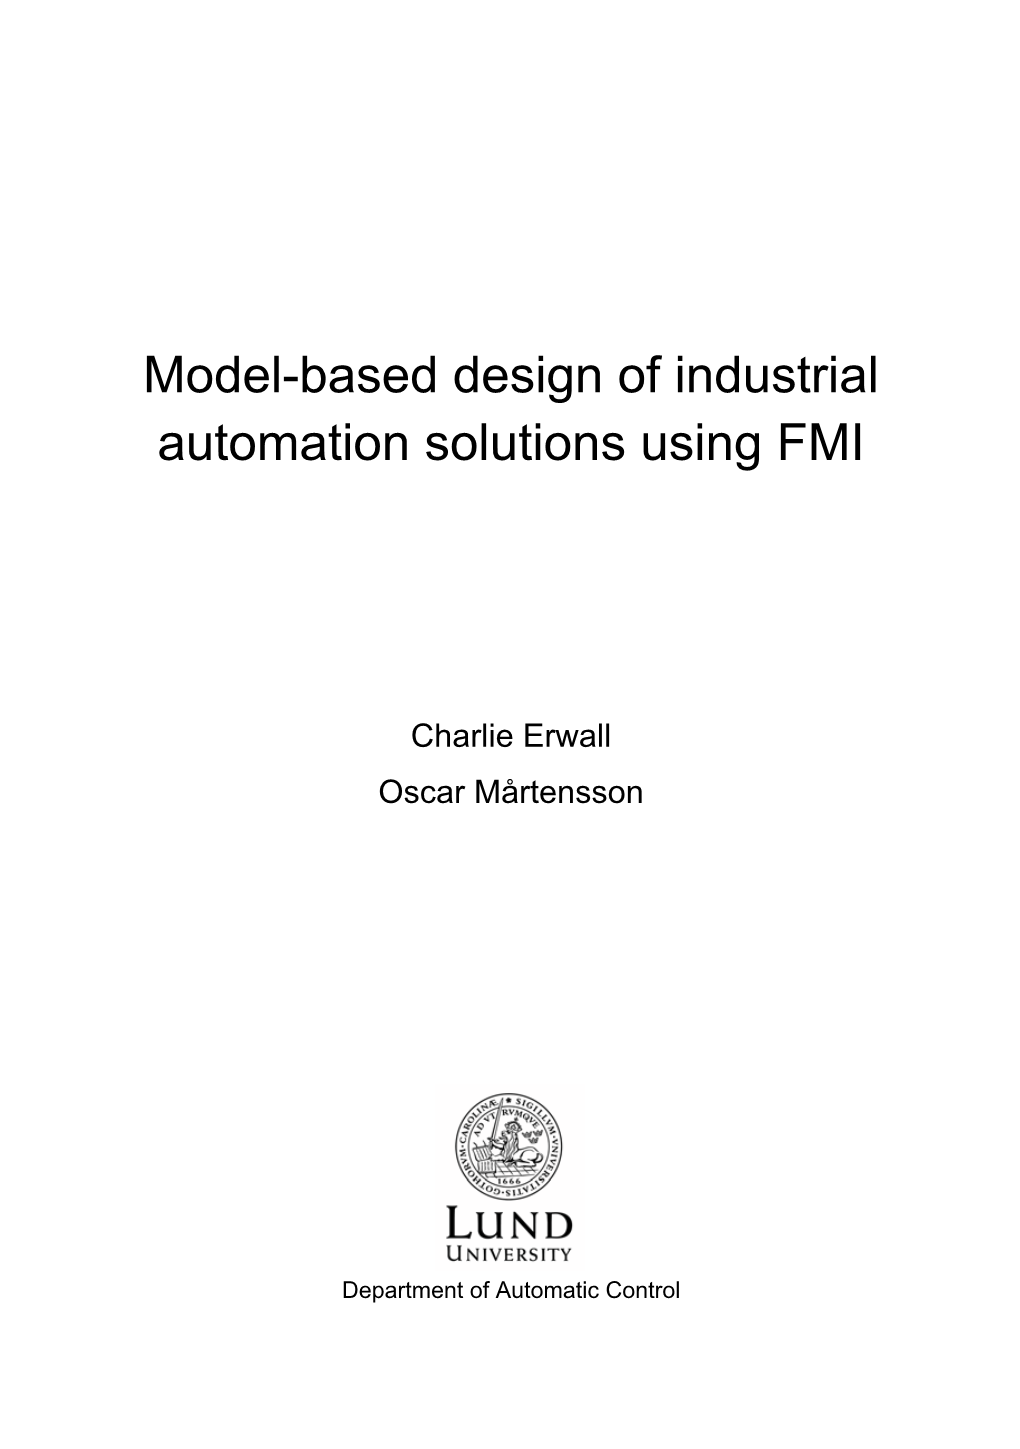 Model-Based Design of Industrial Automation Solutions Using FMI